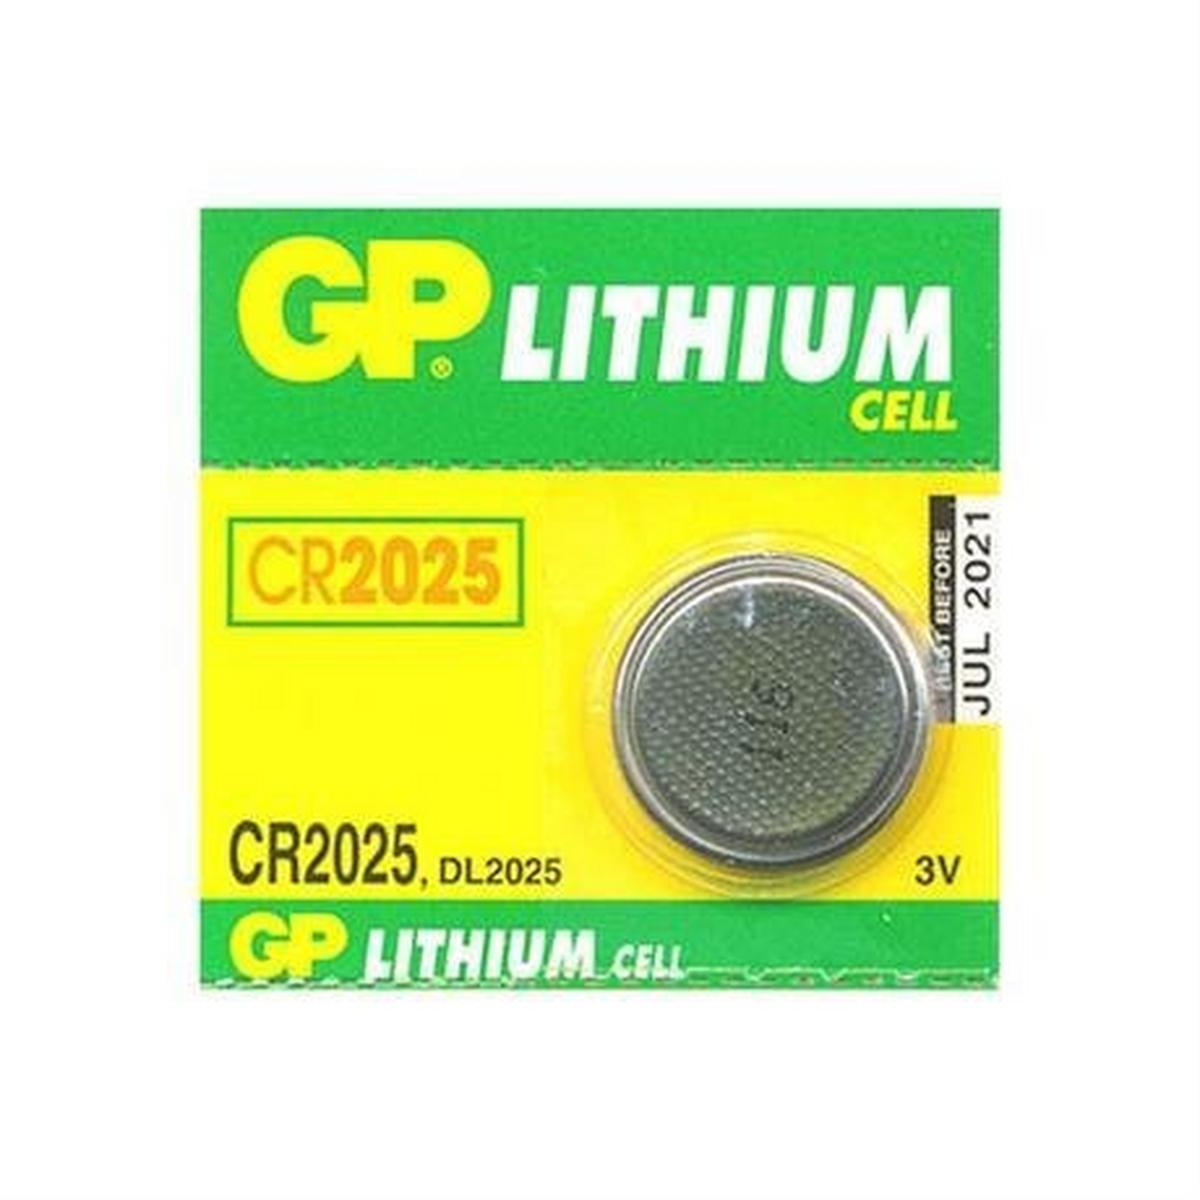 Miscellaneous Batteries: GP Lithium Button Battery CR2025 (pack of 1)